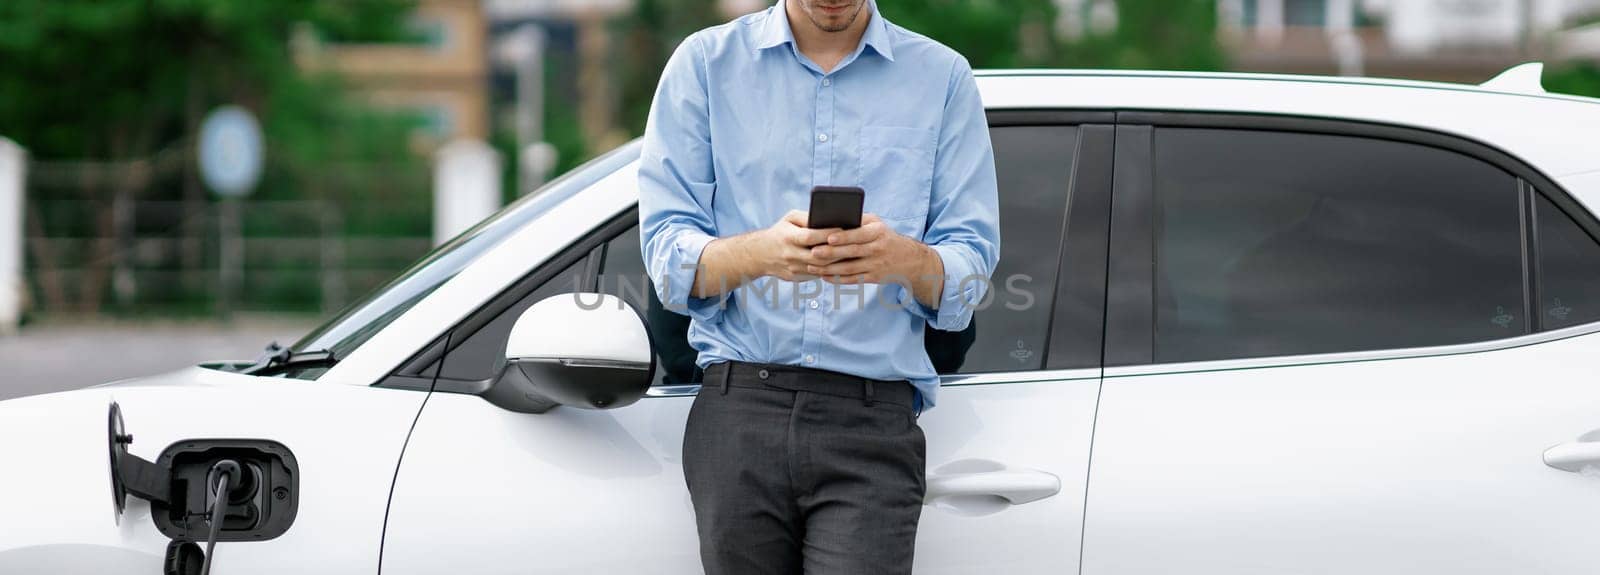 Progressive businessman talking on the phone, leaning on electric car recharging with public EV charging station, apartment condo residential building on the background as green city lifestyle.